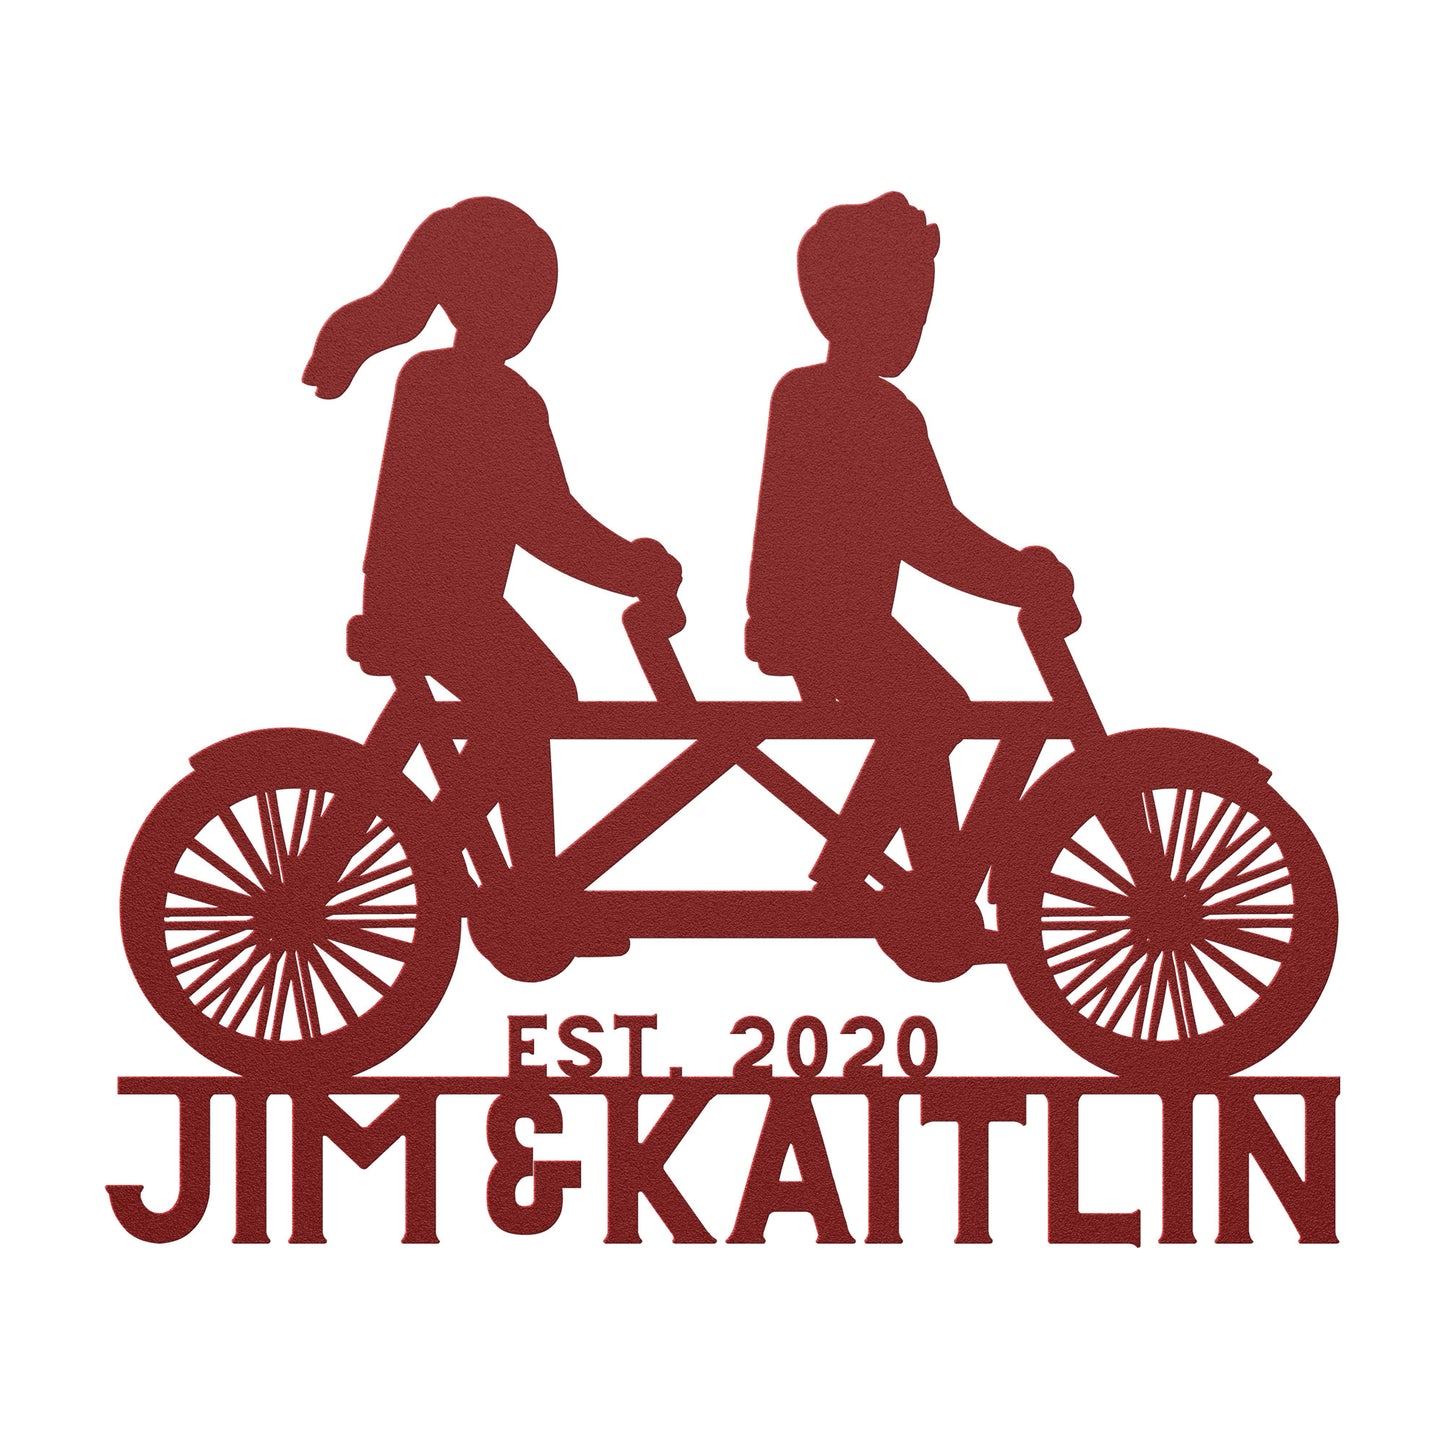 Jim and Katie's wedding logo is beautifully crafted on a Couple Cycle on Tandem Bike Metal Wall Art by teelaunch, perfect for adding a touch of elegance to their home decor.